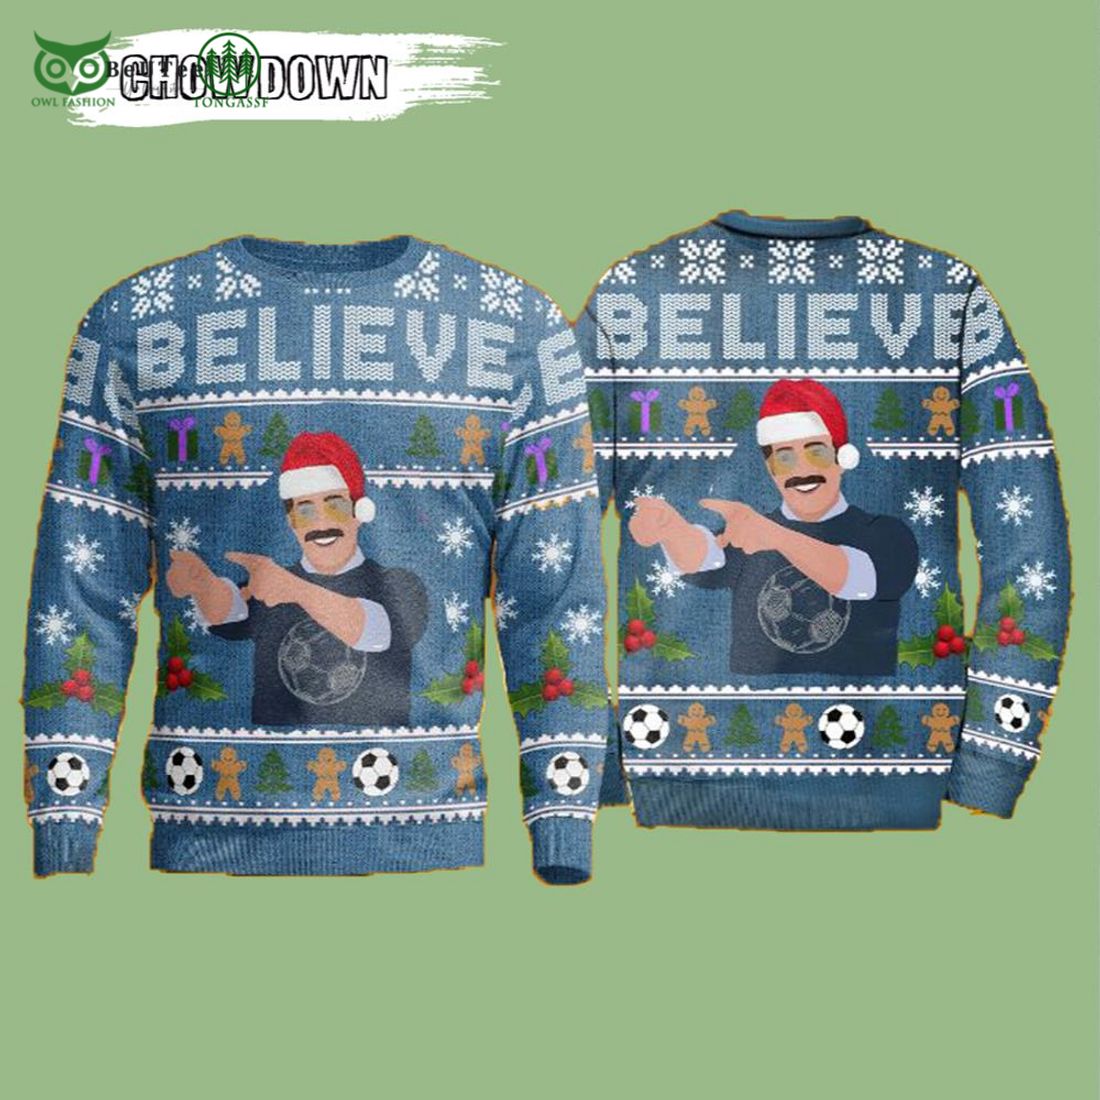 believe funny team lasso ugly christmas sweater ted funny xmas 1 hqrJx